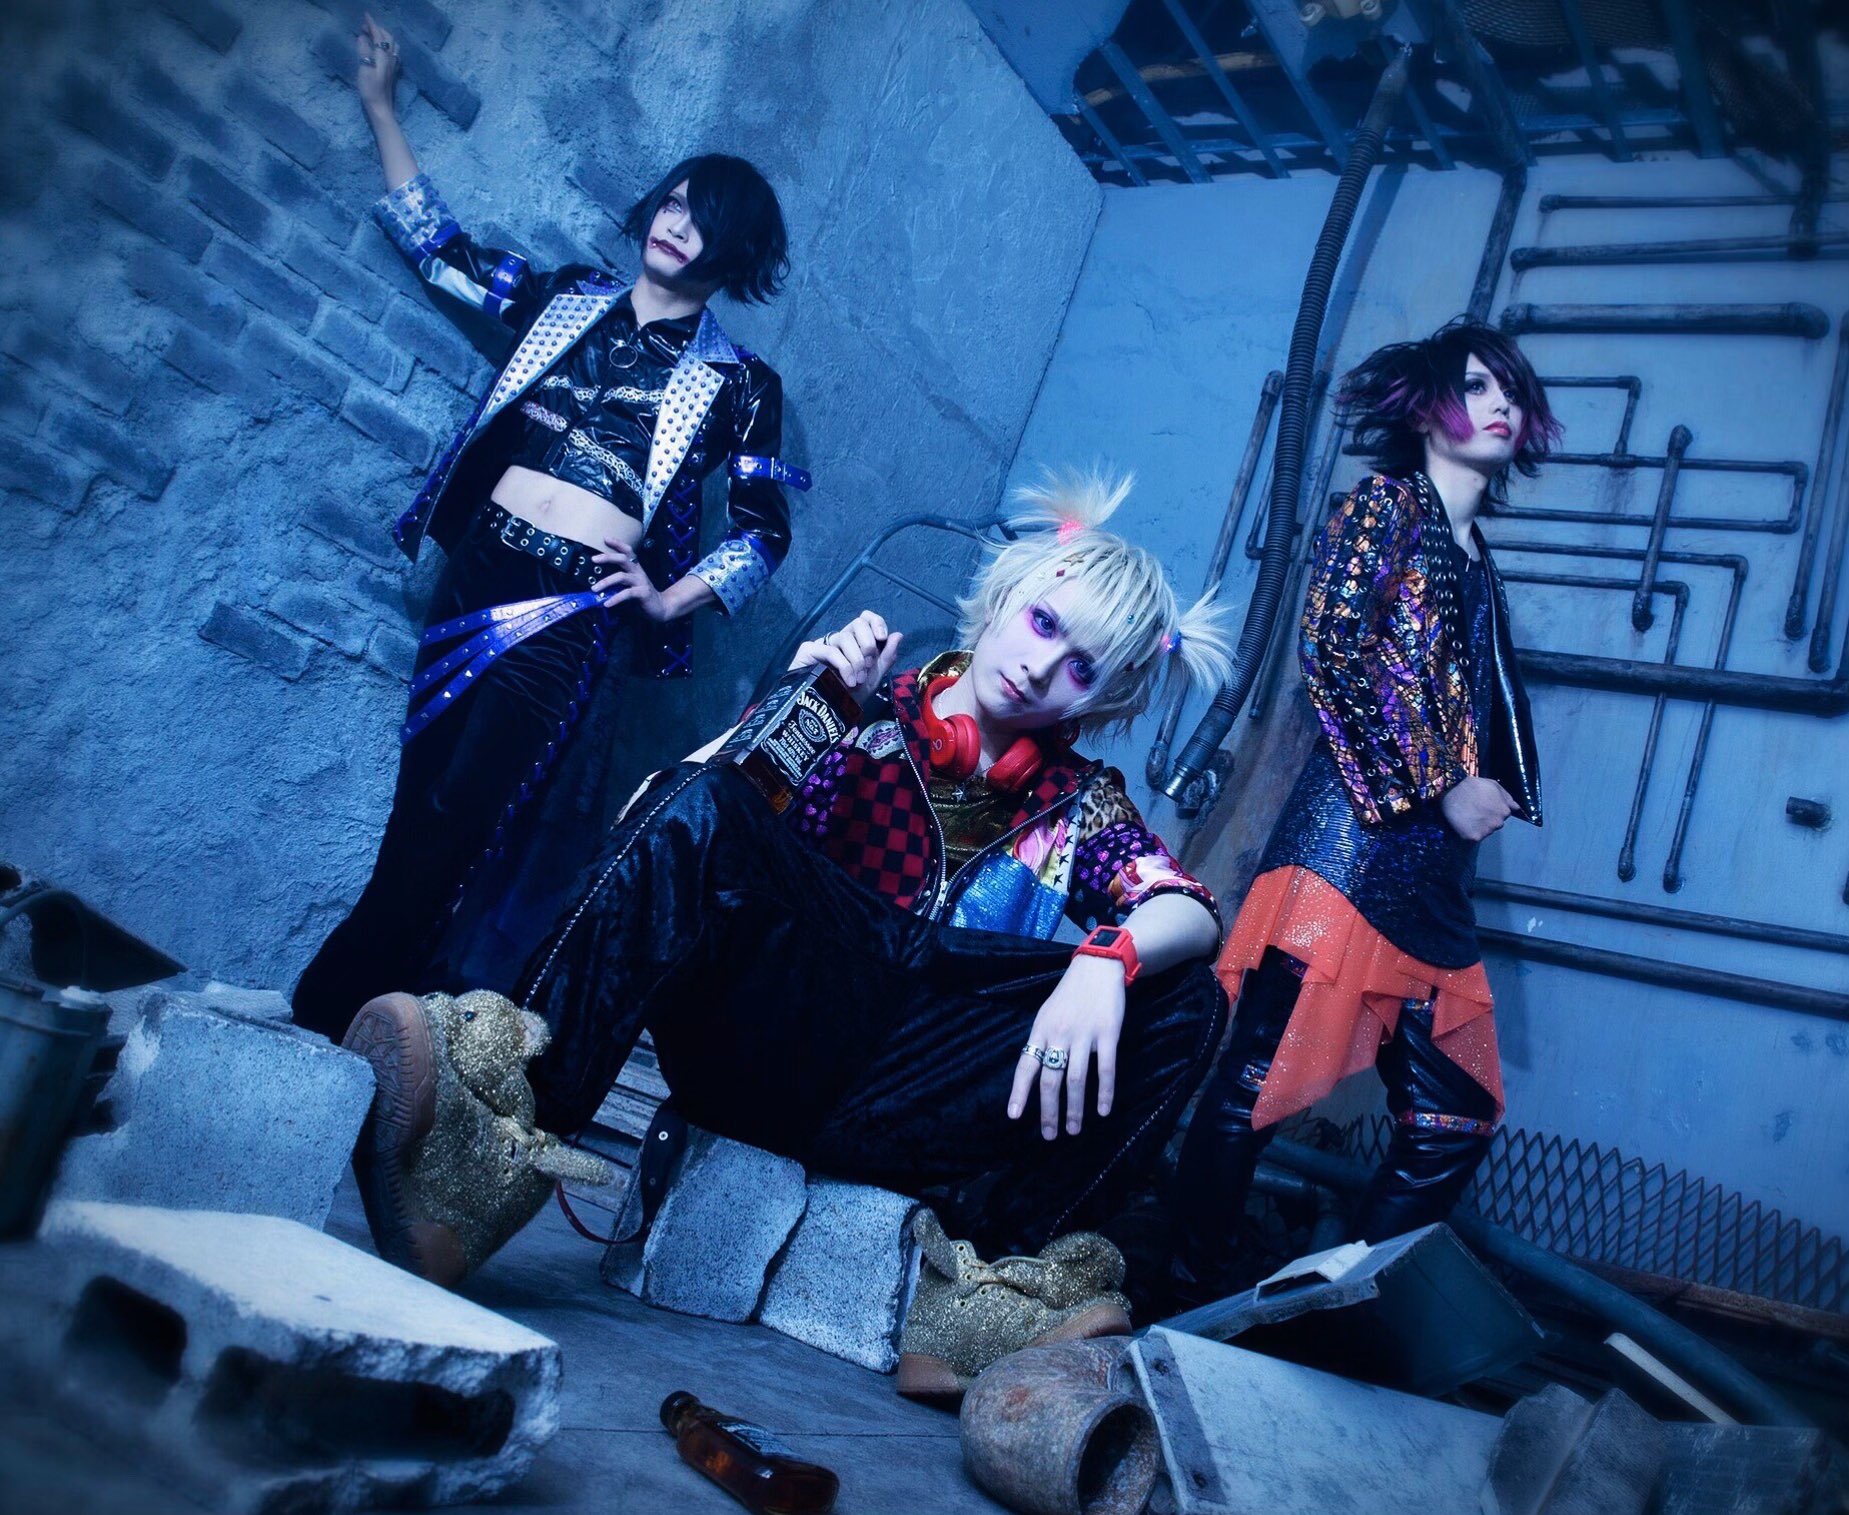 ANKH – New single “Gendaibyou monster” and new look